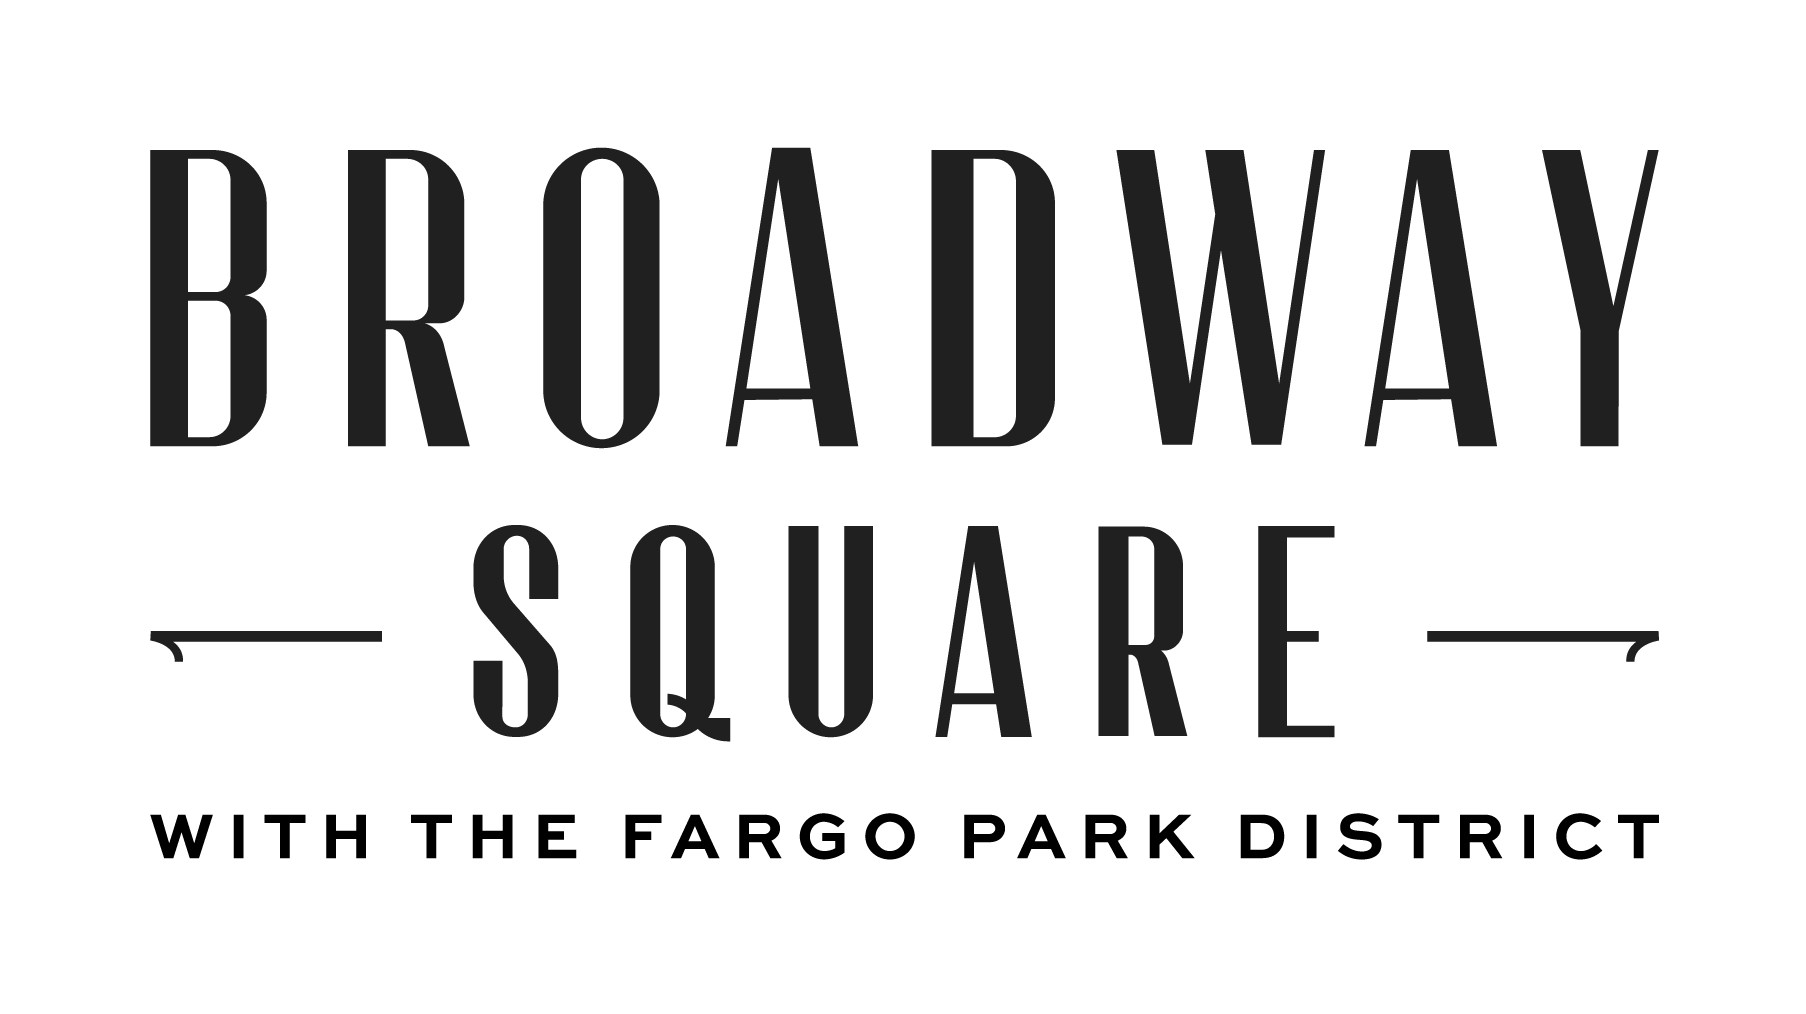 This image shows the logo for Broadway Square.